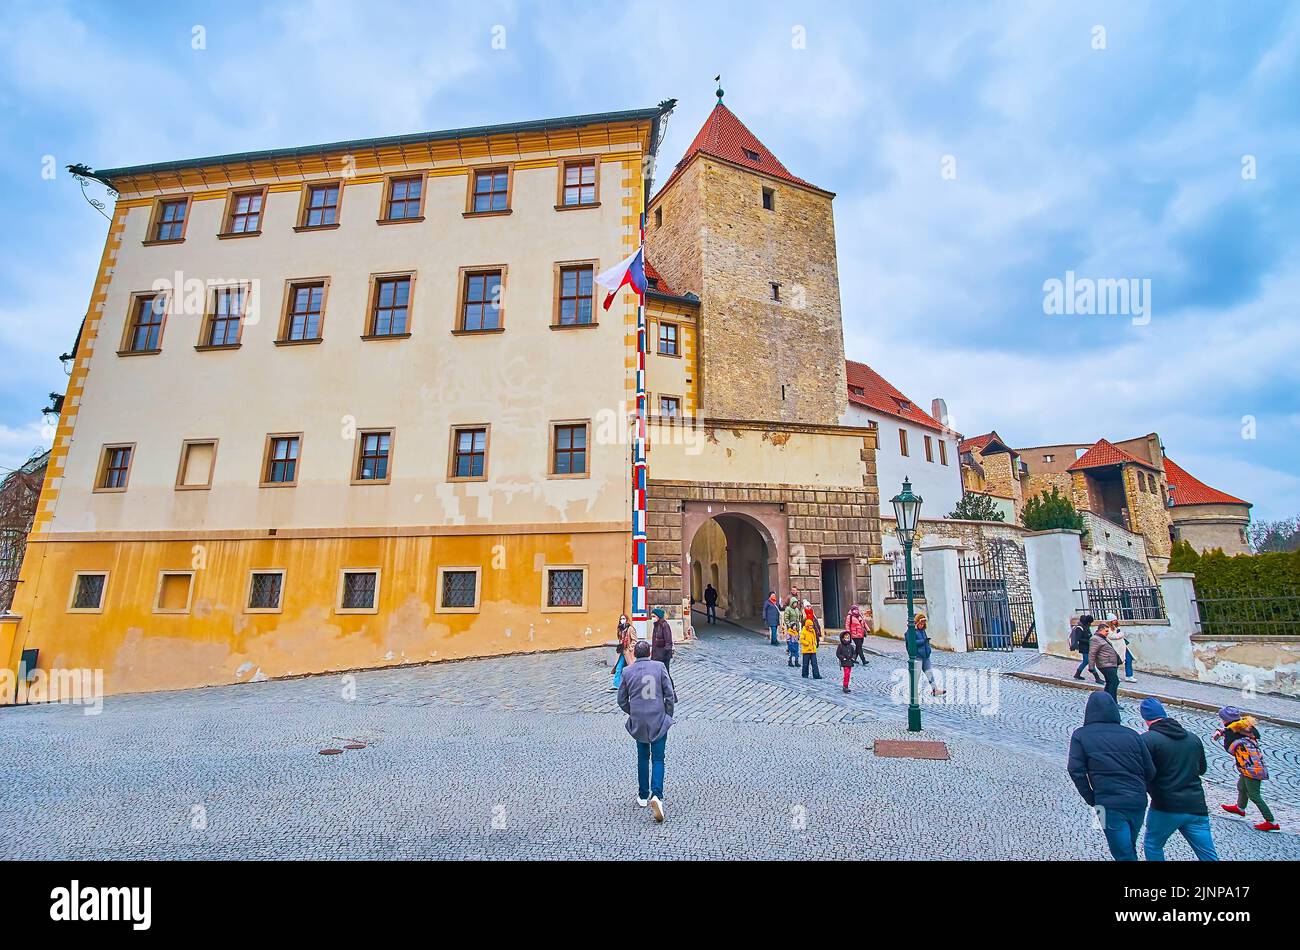 PRAGUE, CAZECH REPUBLIC - MARCH 6, 2022: The medieval Black Tower, built adjacent to the Lobkowicz Palace, located on Prague Castle grounds, on March Stock Photo